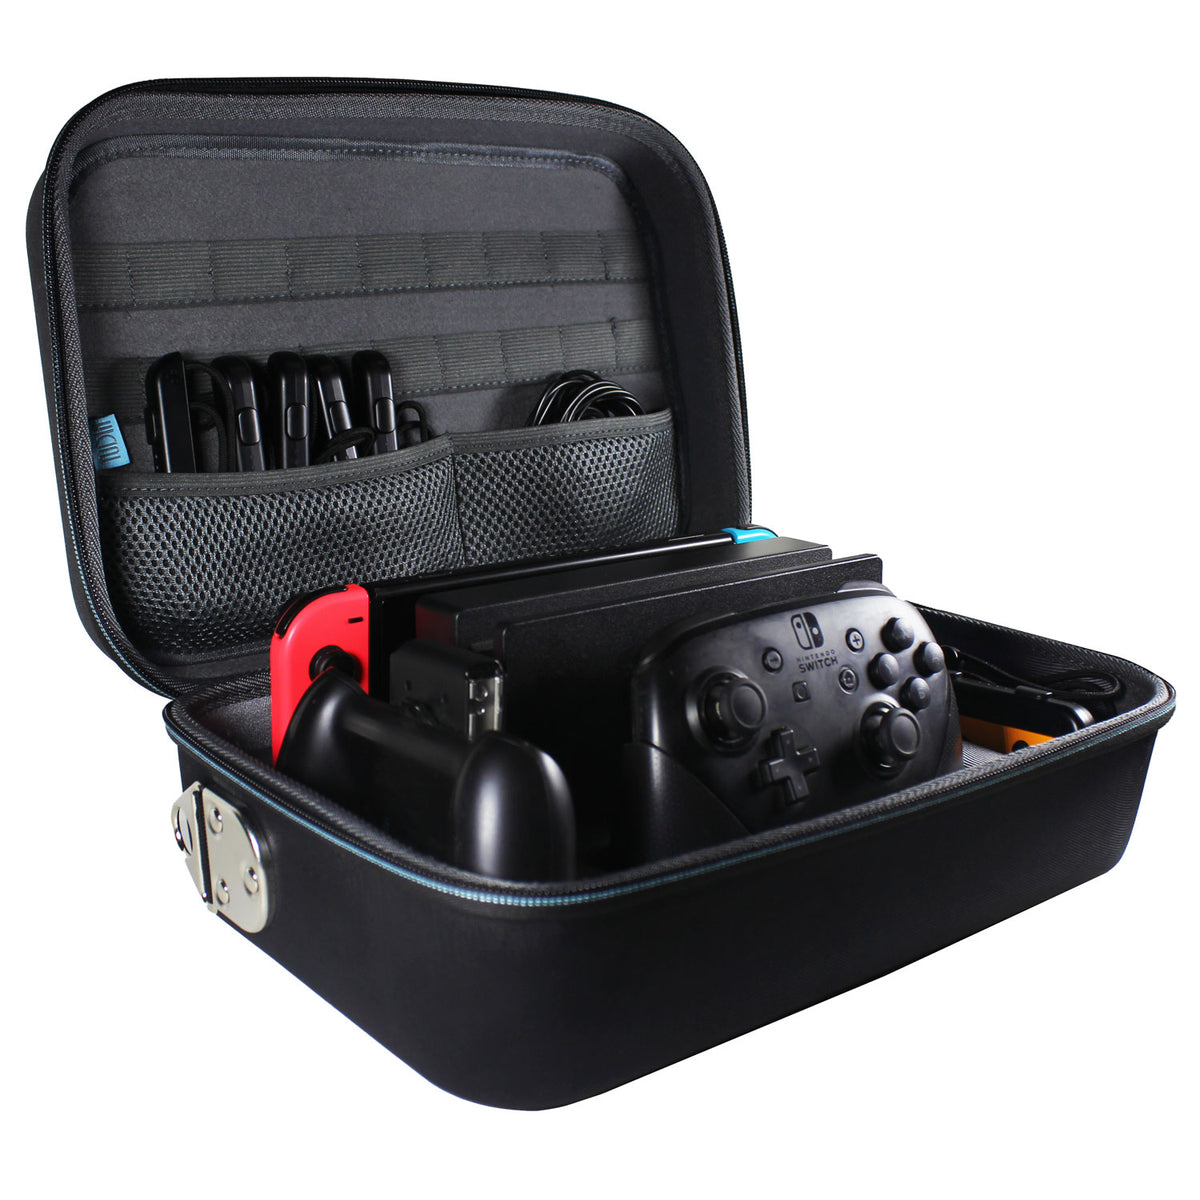  sisma Switch Controller Case Compatible with Nintendo Switch  Pro Controller, Travel Safekeeping Controller Holder Protective Cover  Storage Case Black Carrying Bag : Video Games